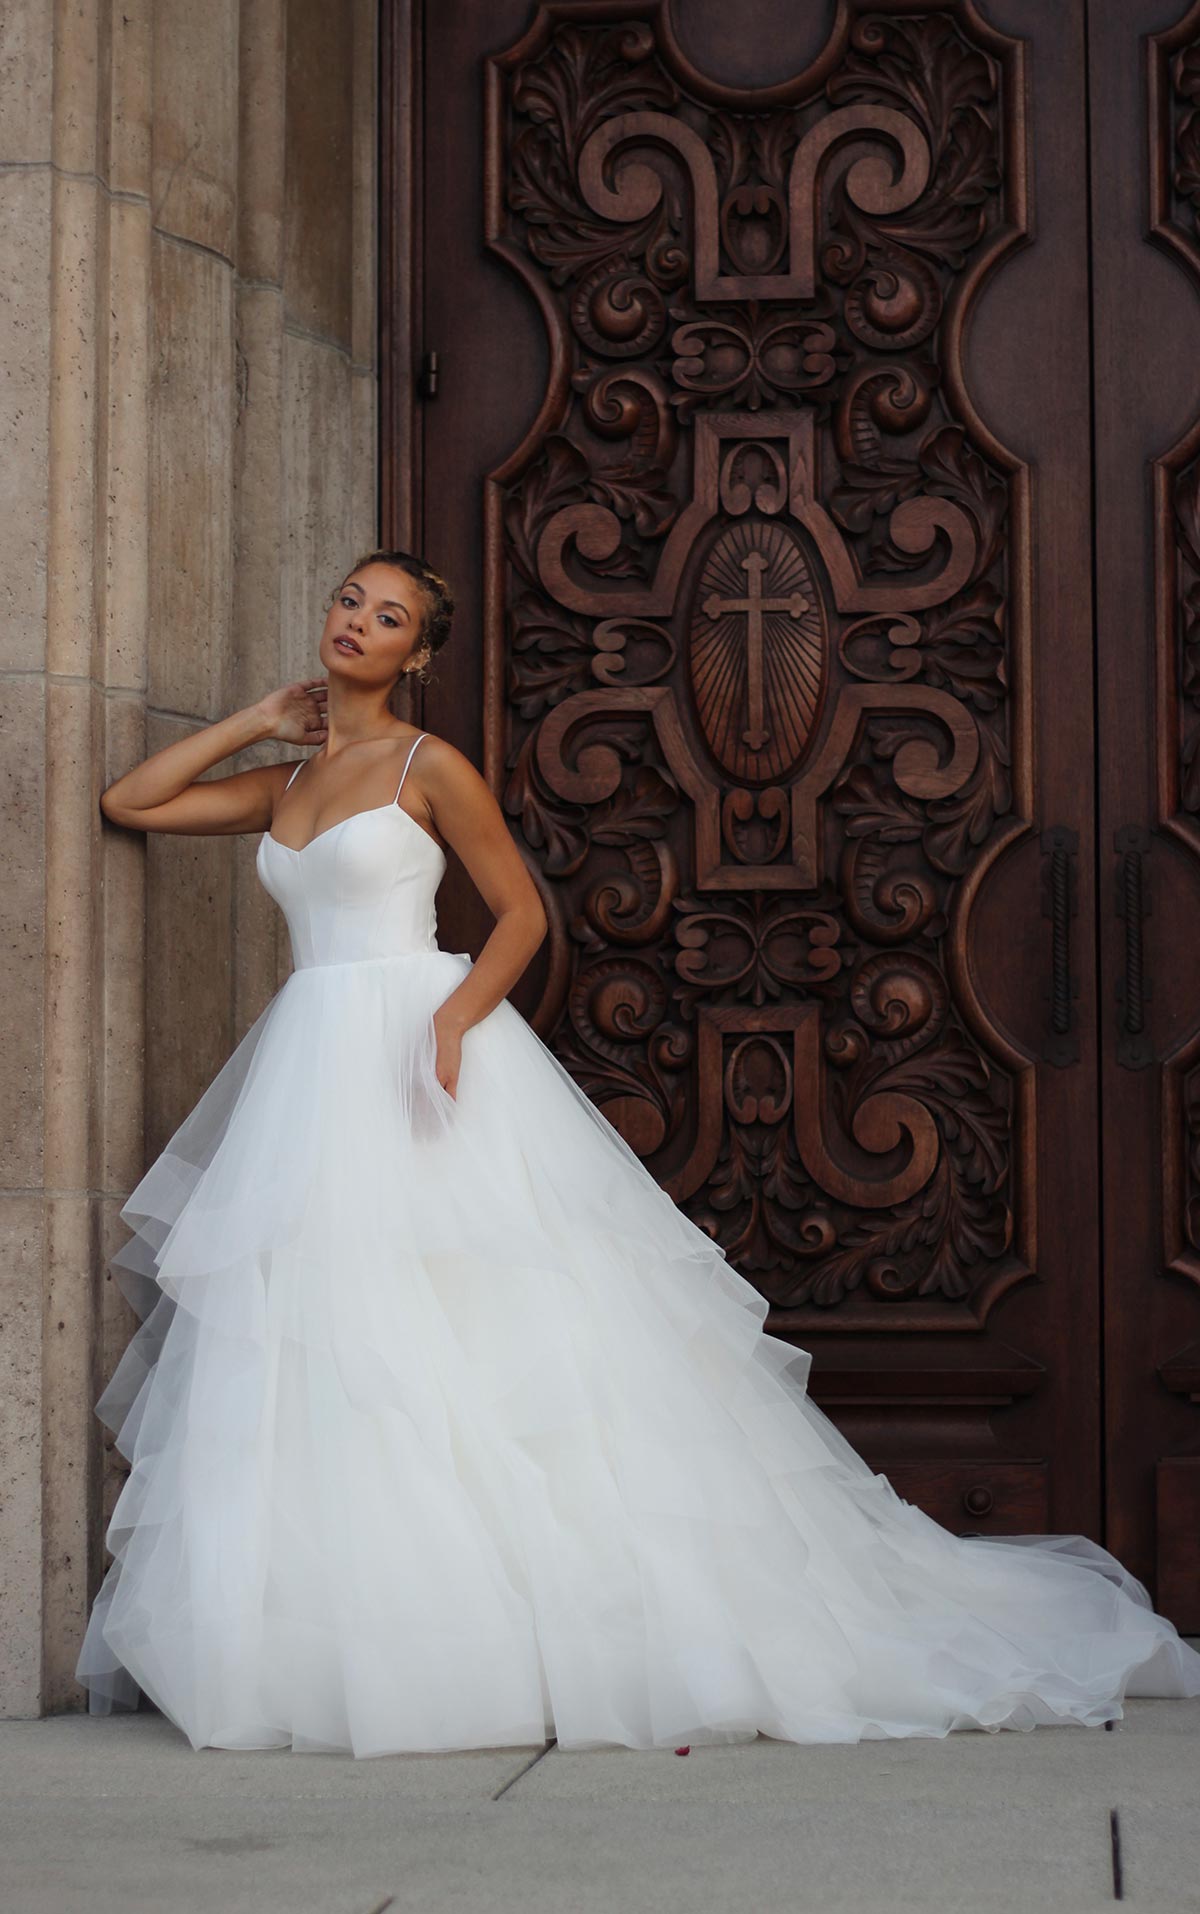 Simple tulle Wedding Dress - off the peg wedding gown